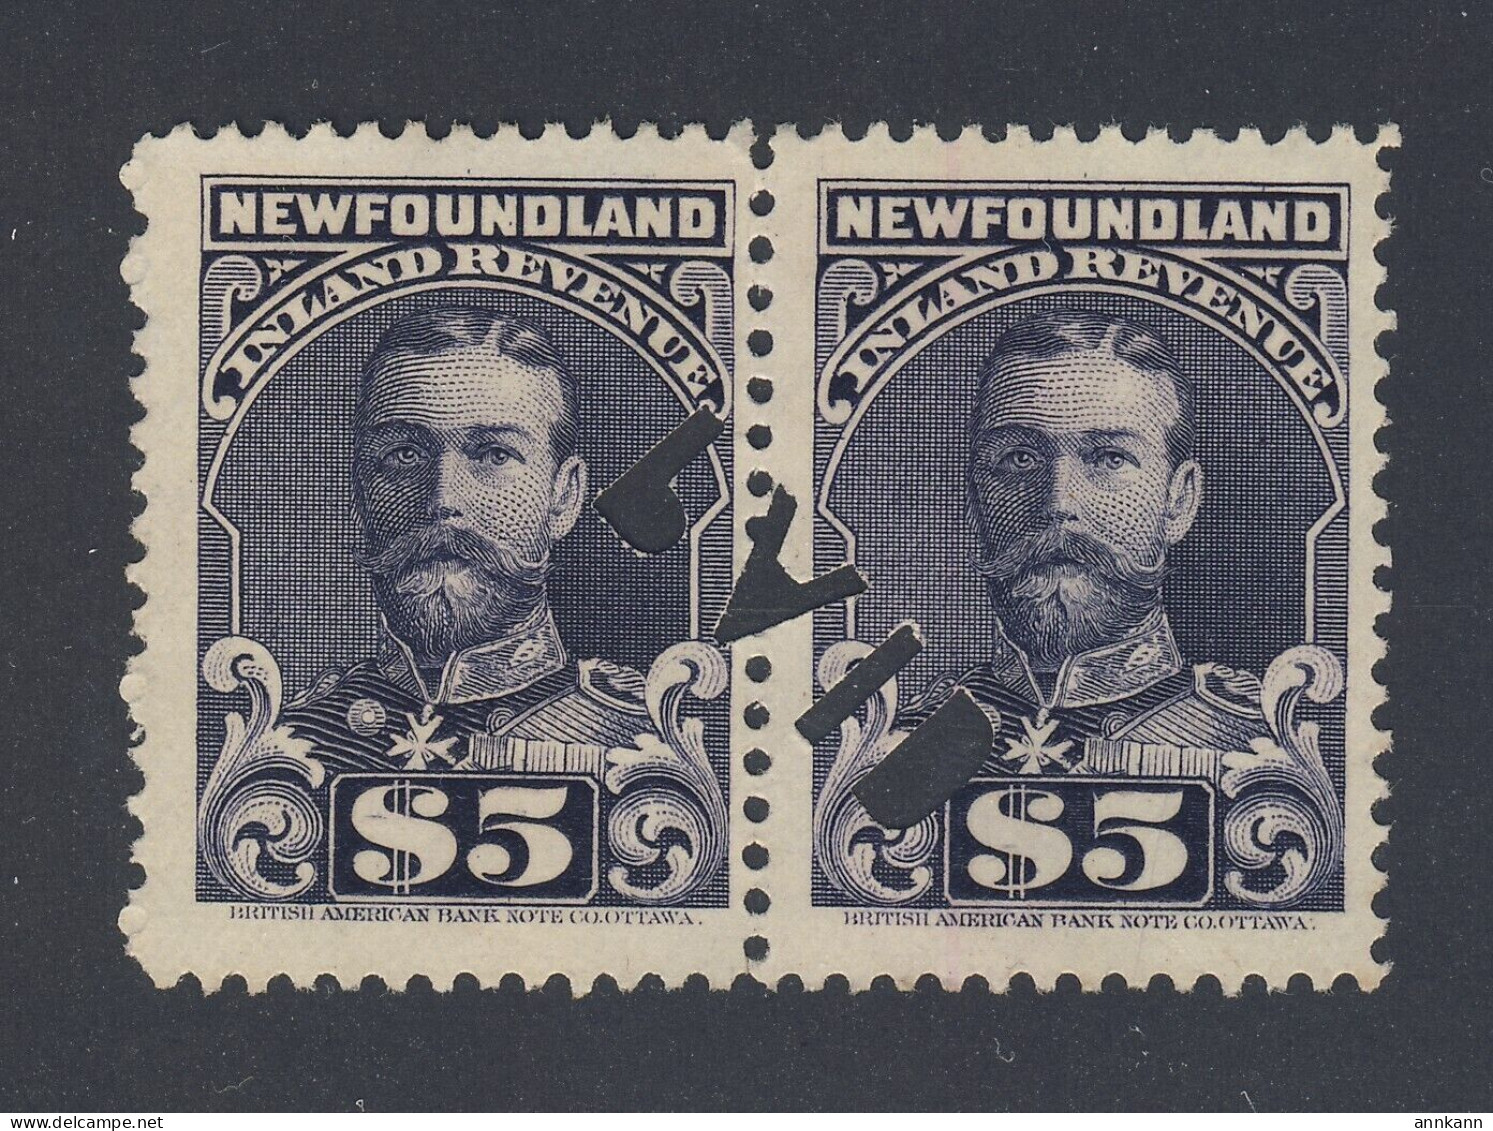 2x Newfoundland George V Revenue Stamps; Pair #NFR21-$5.00 Perf 11 GV= $150.00 - Fiscale Zegels